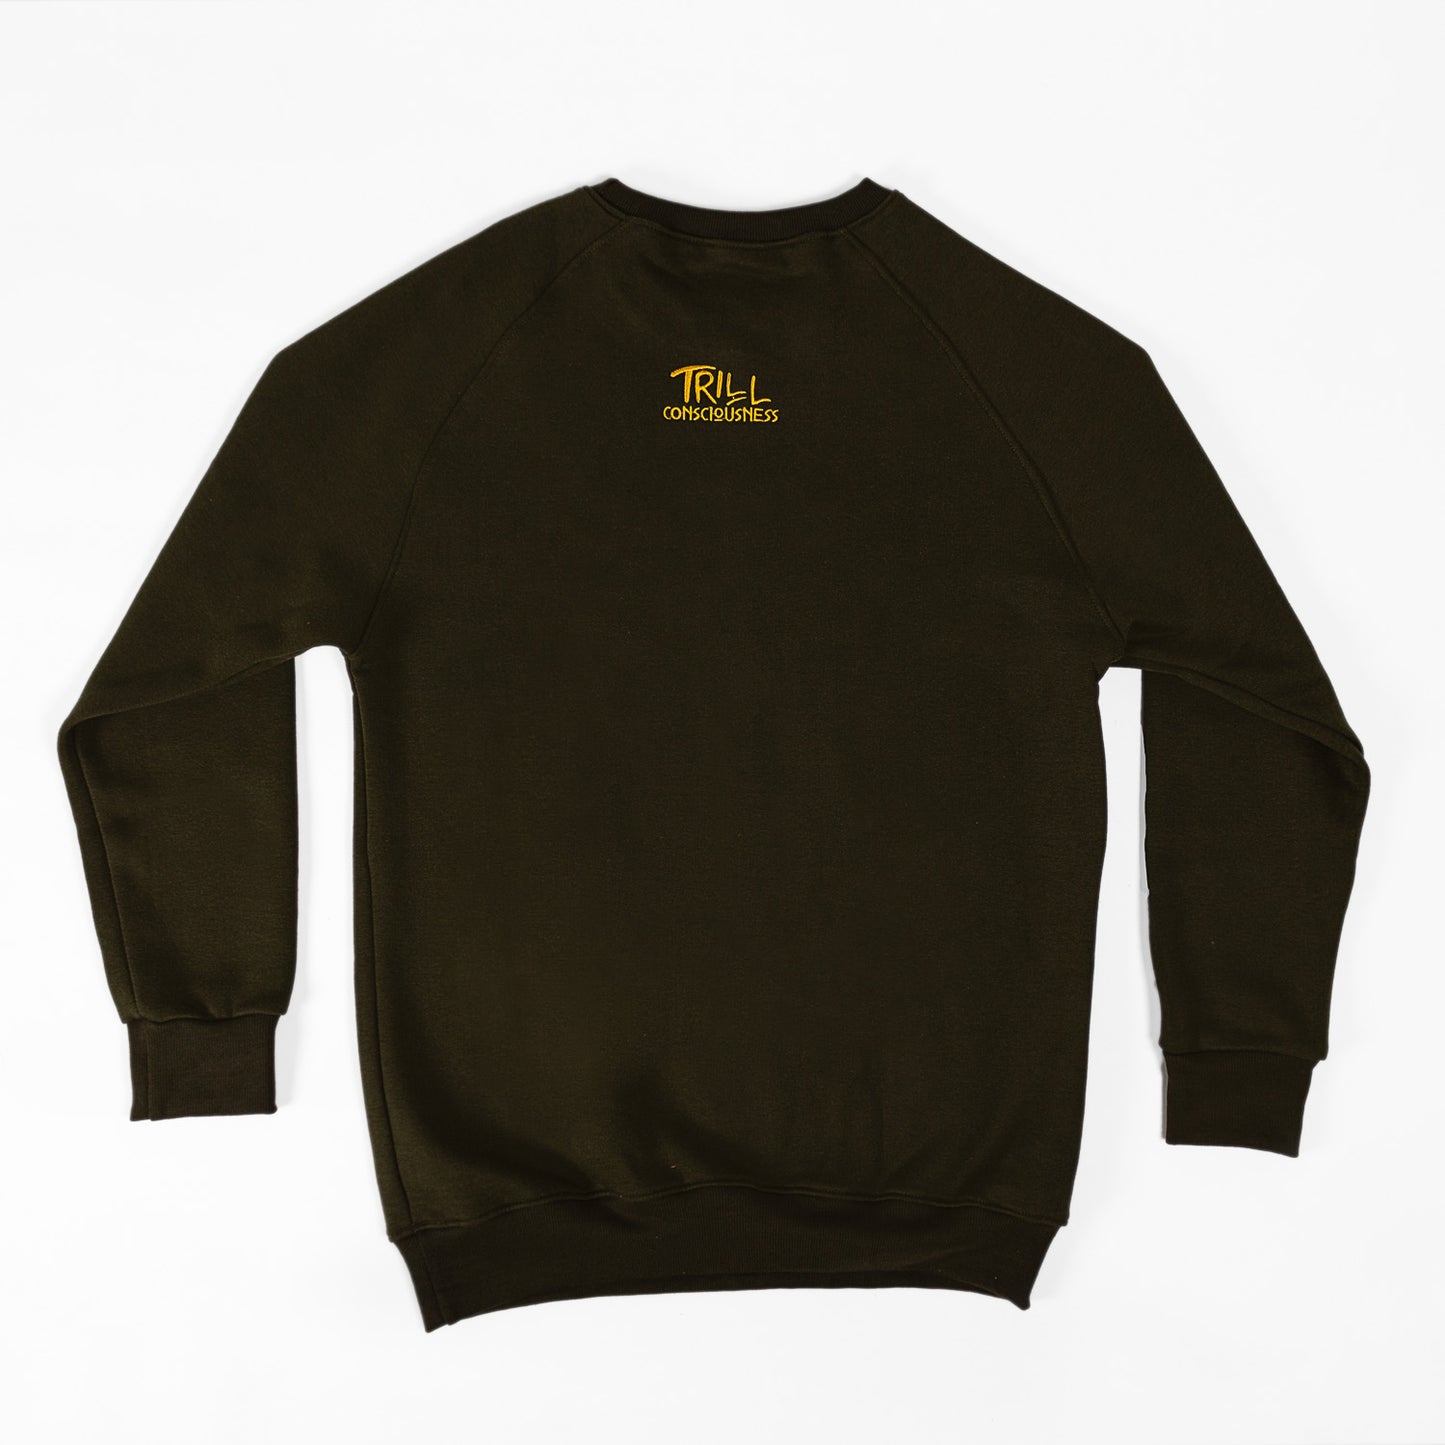 Embroidered Crewneck Sweater